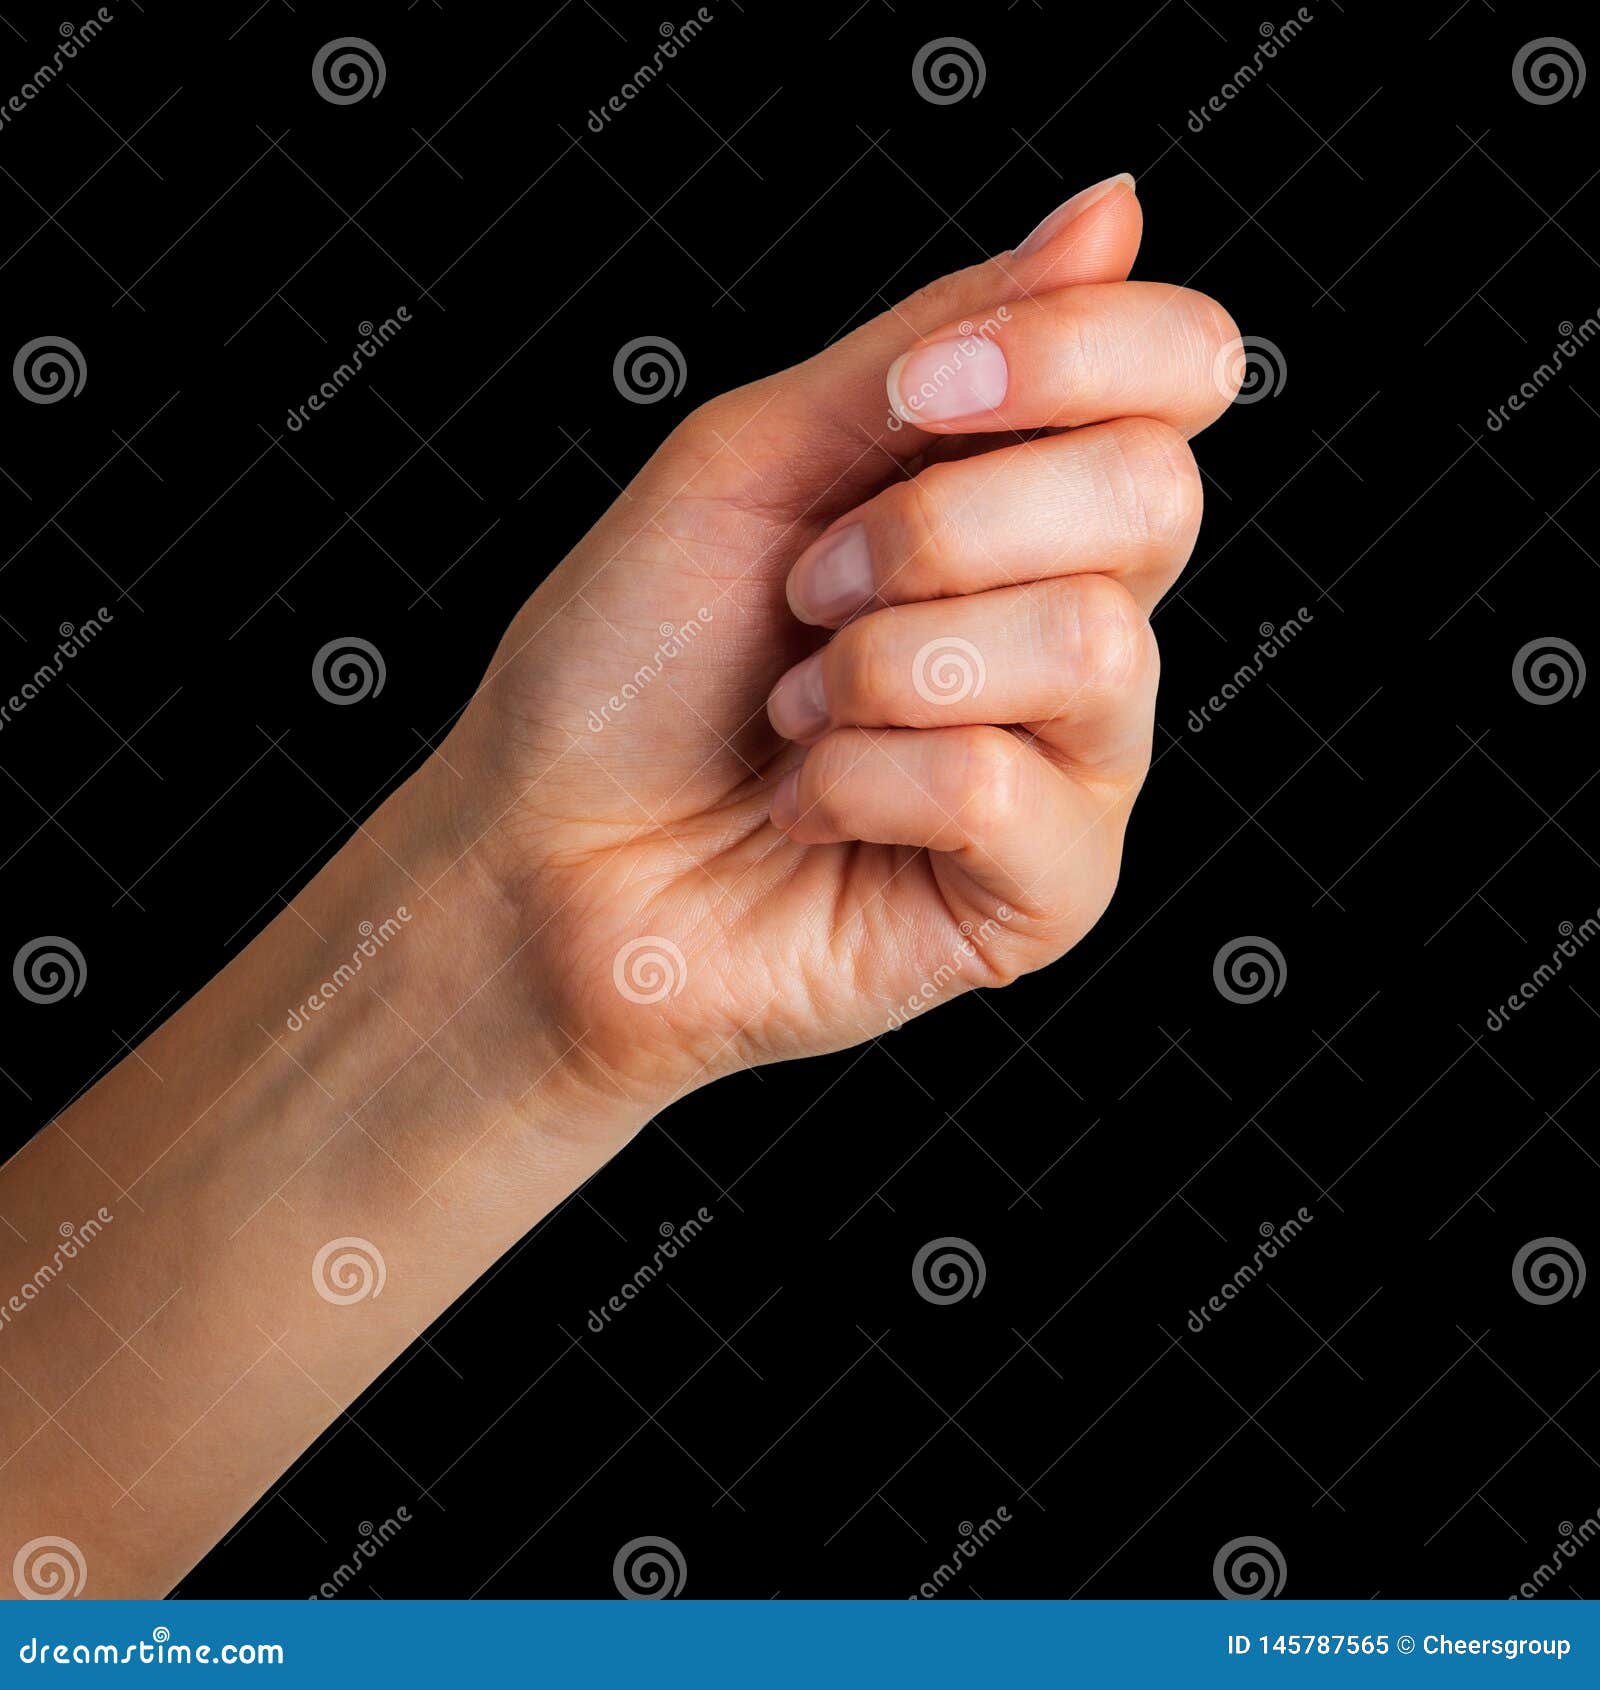 Well-graced European Model In A Black Dress Poses With Her Hand Up. This  Attitude Makes The Photo Especially Hot Stock Photo, Picture and Royalty  Free Image. Image 62819728.